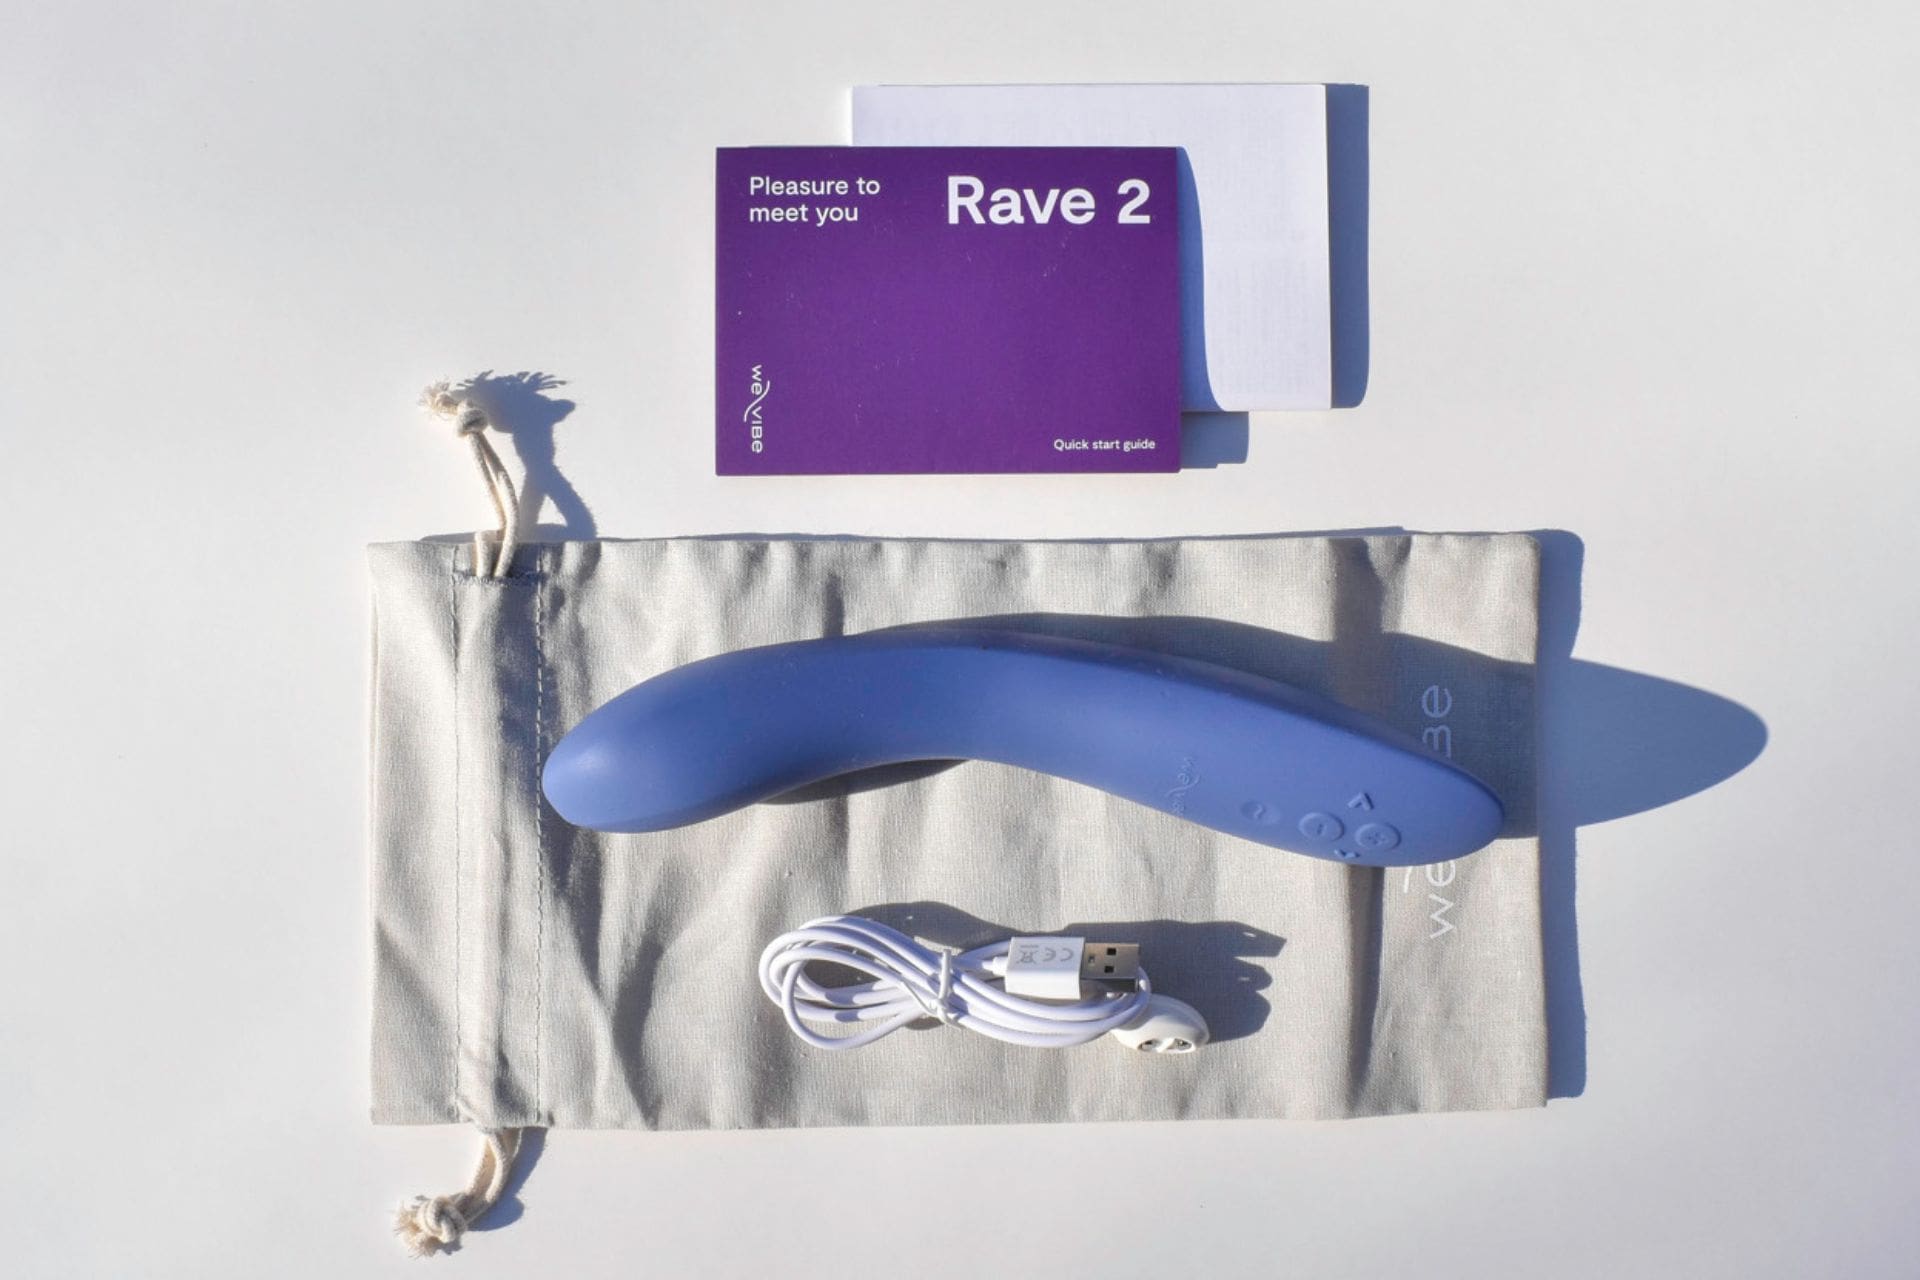 We-Vibe Rave 2 unboxed